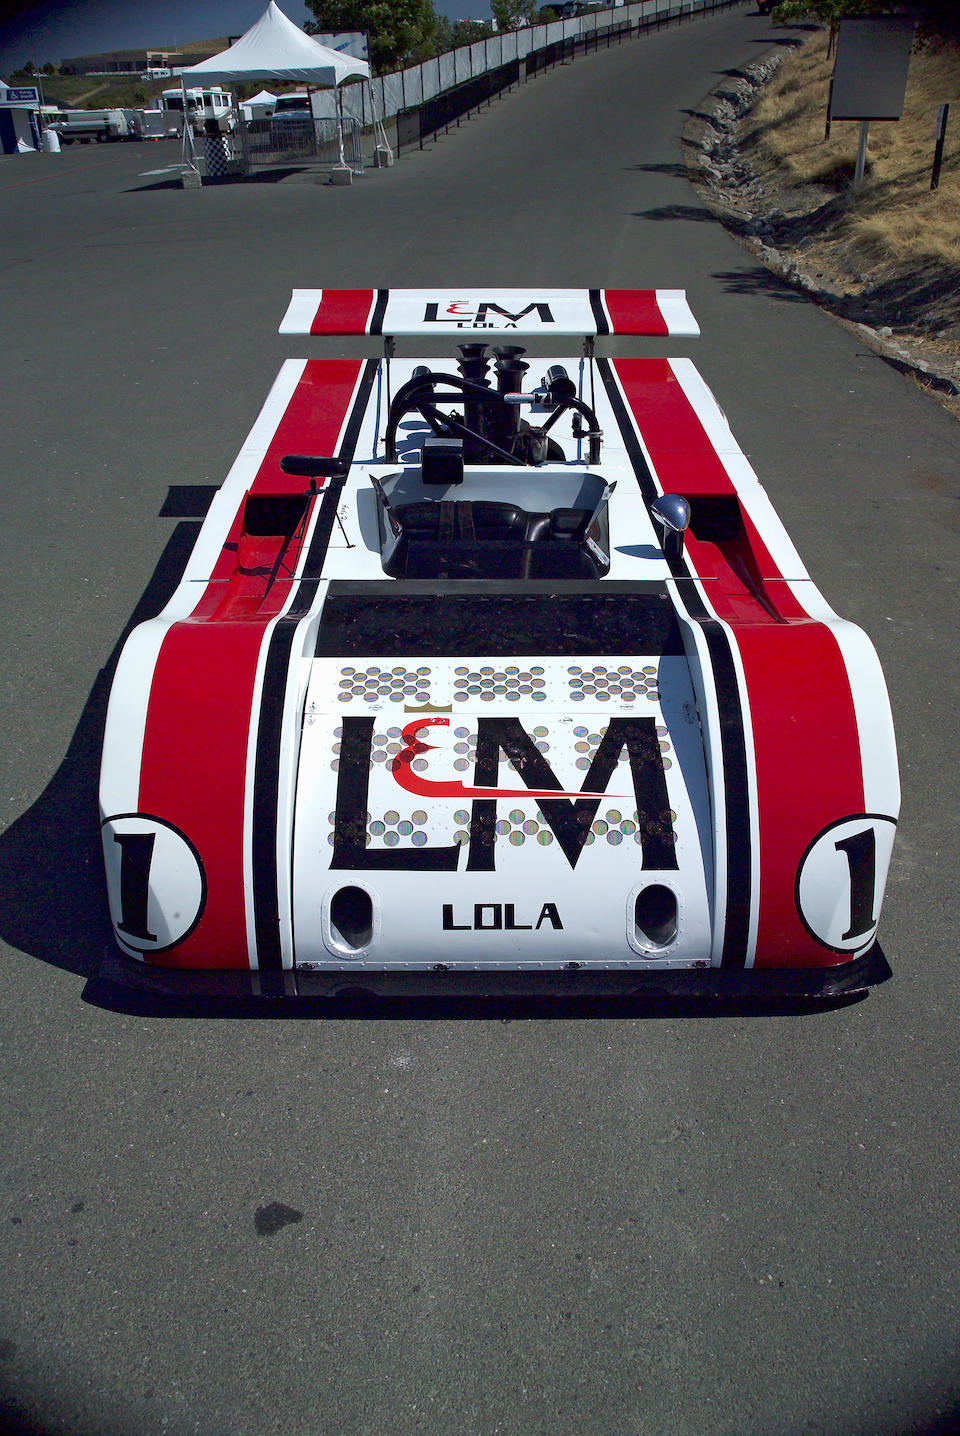 The ex-L&M Carl Haas/Jackie Stewart team,1971 Lola-Chevrolet T260 CanAm Racing Spider  Chassis no. T260-HU2